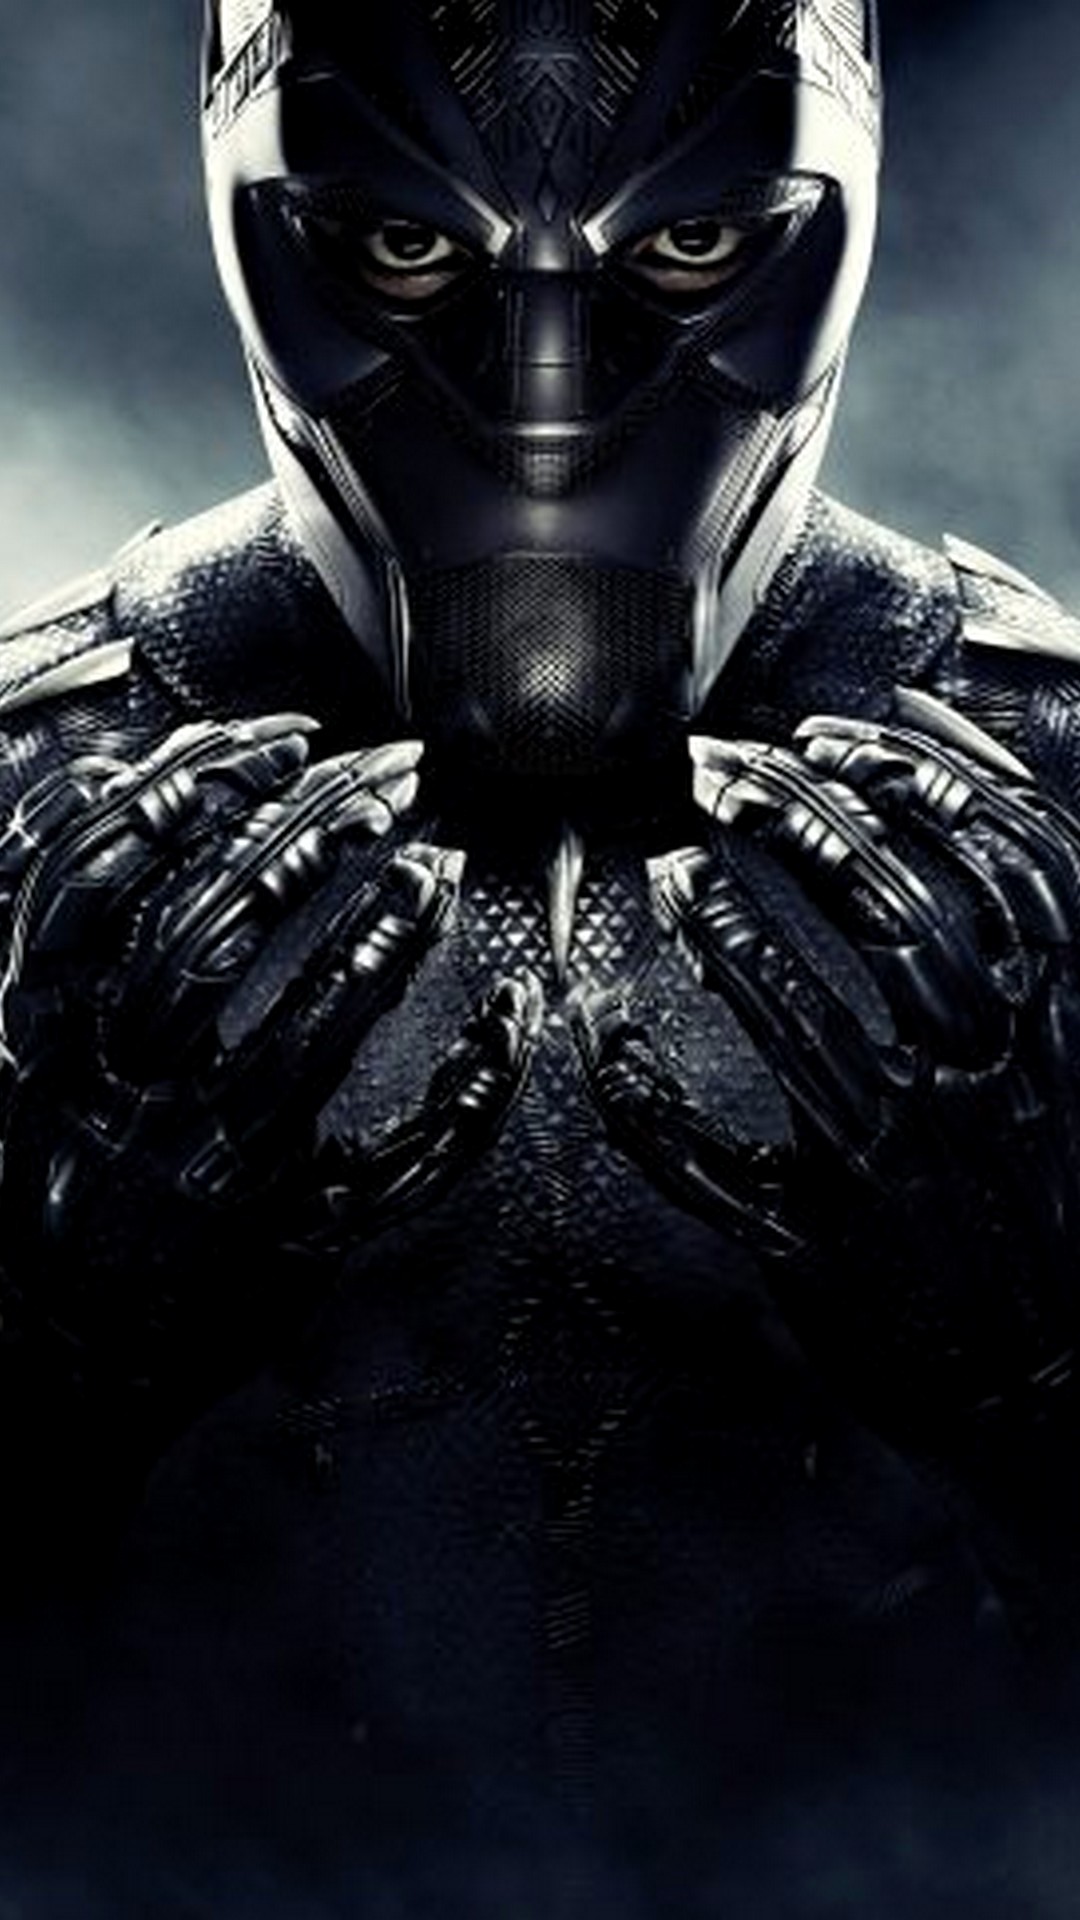 Black Panther Superhero iPhone 7 Wallpaper with high-resolution 1080x1920 pixel. You can use this poster wallpaper for your Desktop Computers, Mac Screensavers, Windows Backgrounds, iPhone Wallpapers, Tablet or Android Lock screen and another Mobile device